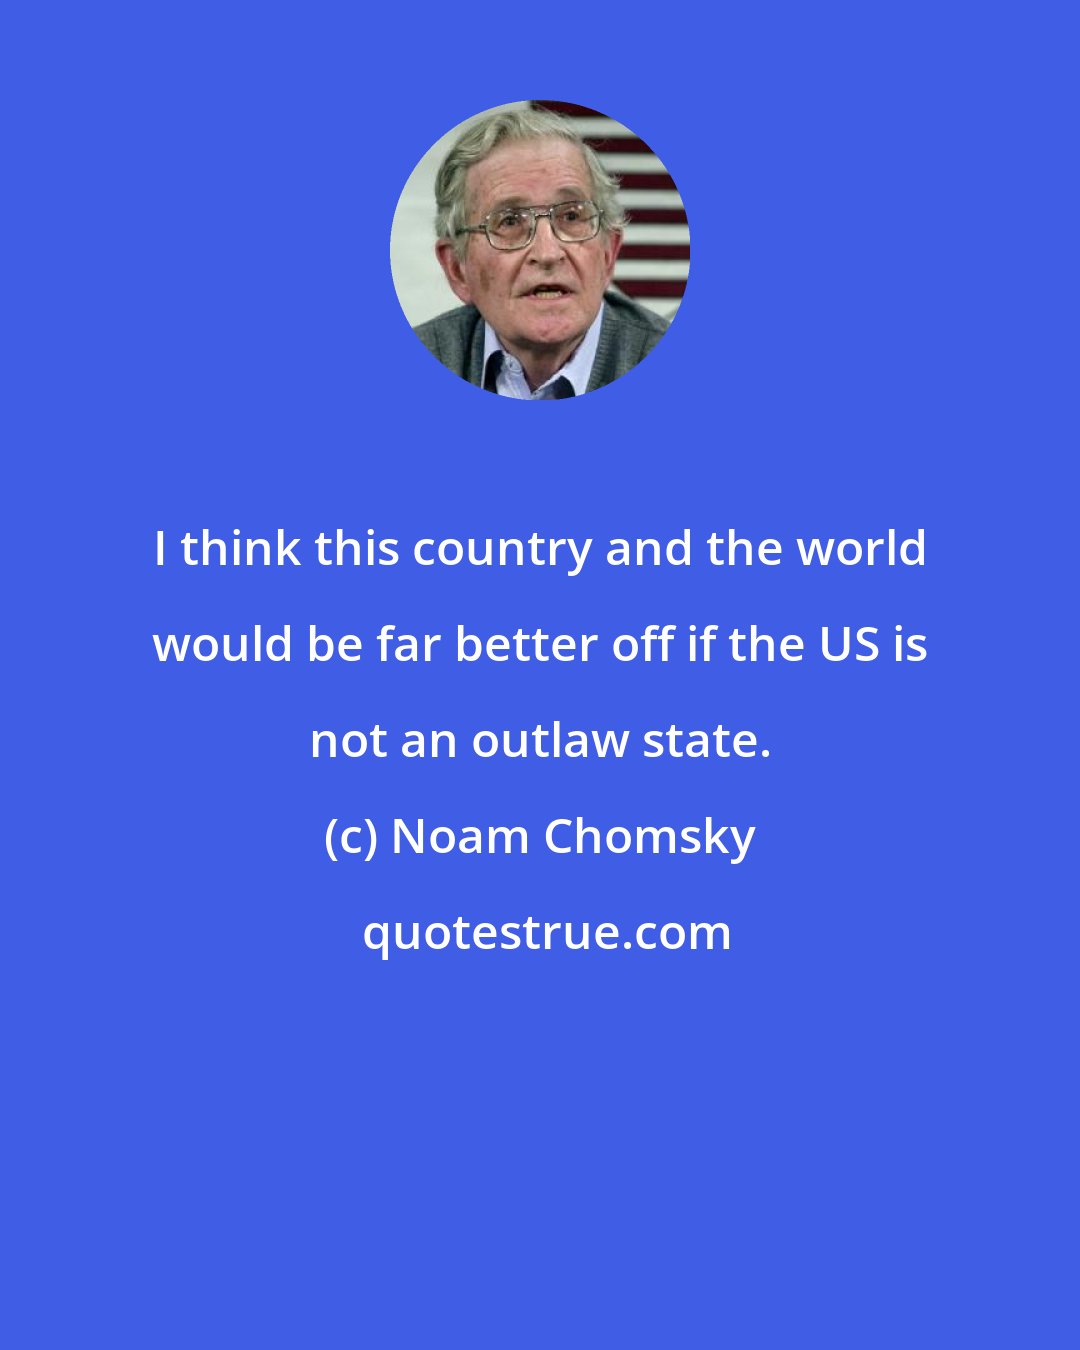 Noam Chomsky: I think this country and the world would be far better off if the US is not an outlaw state.